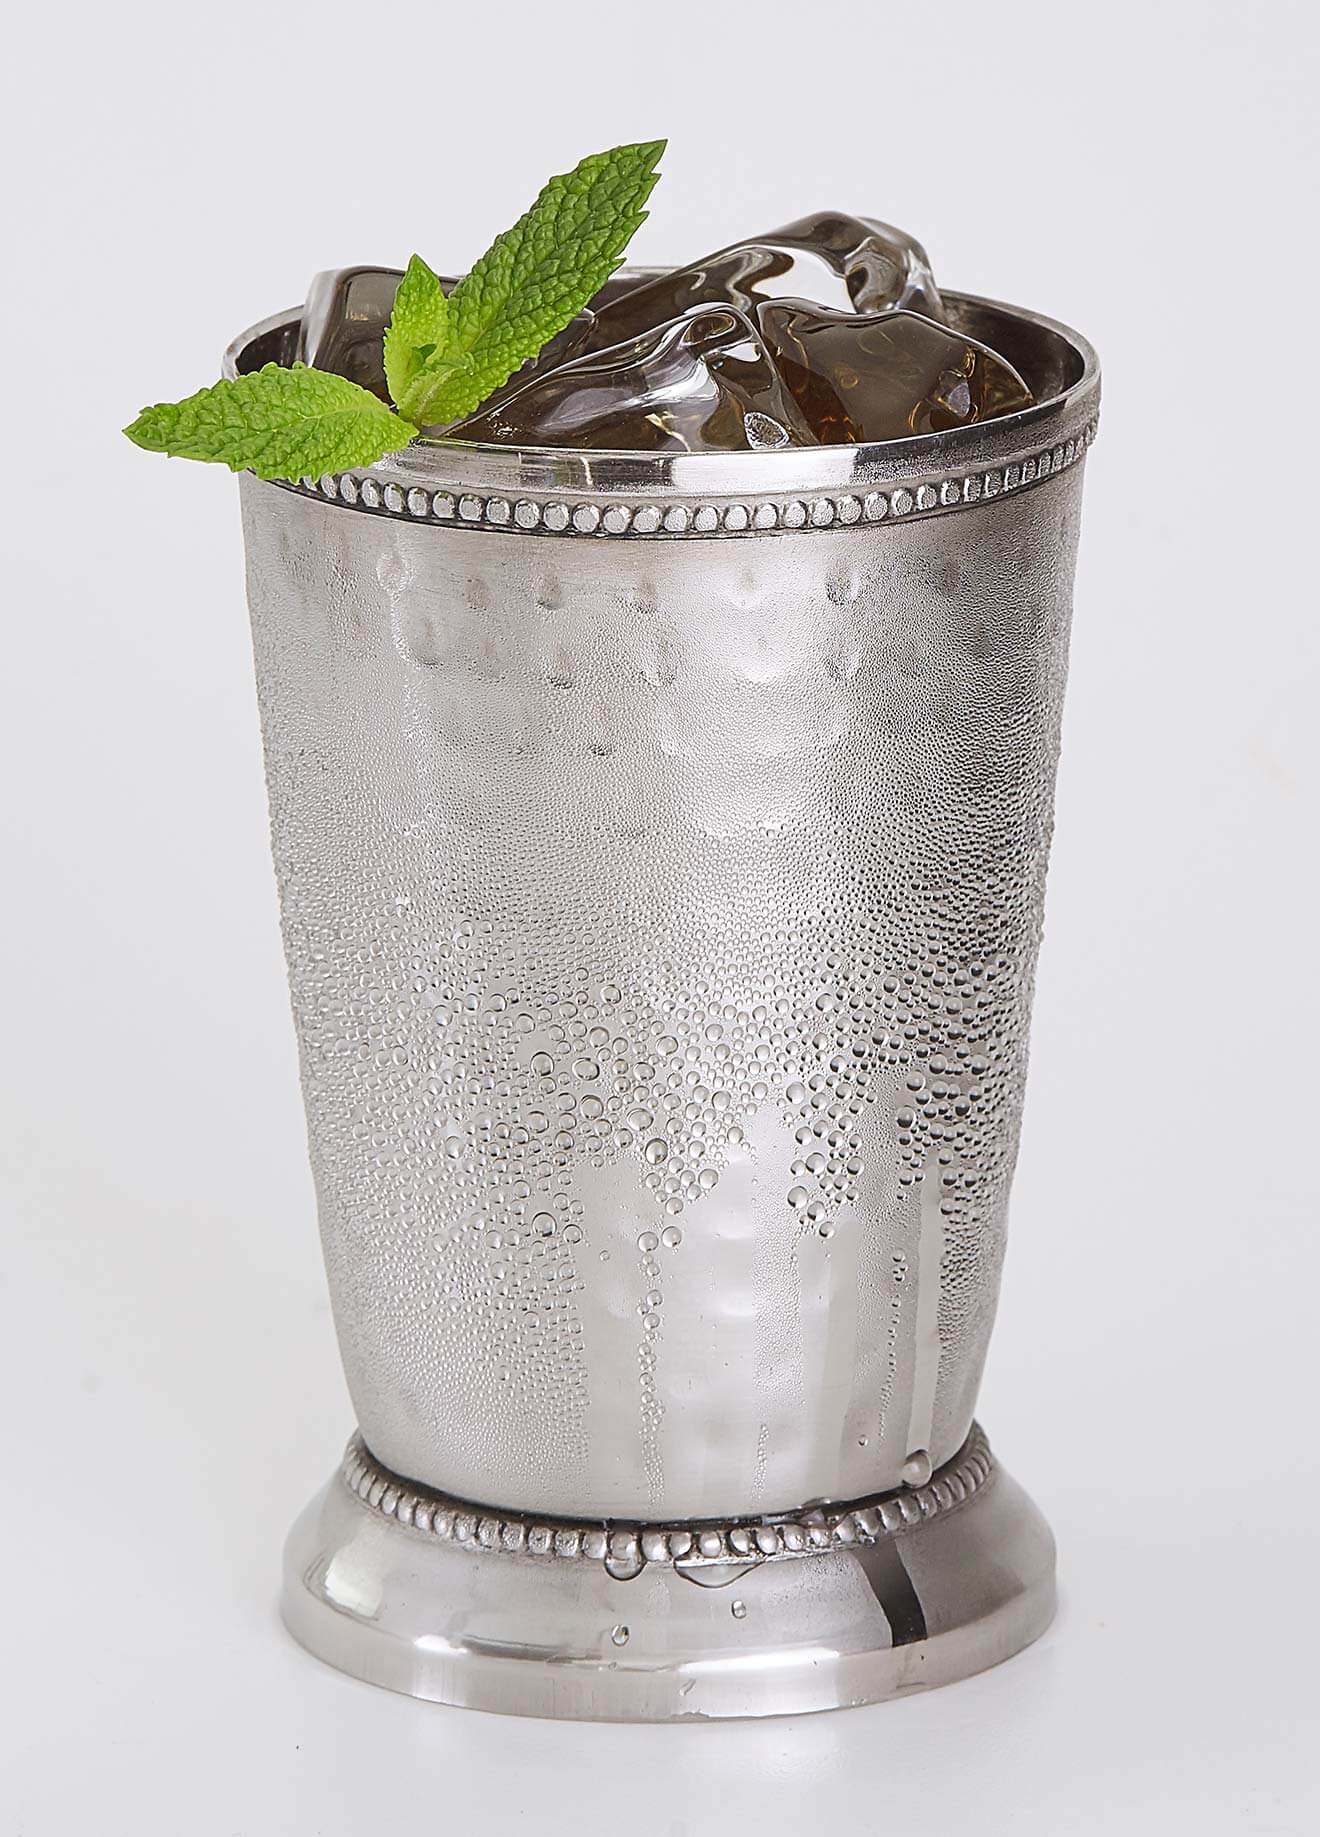 Ginger Julep cocktail made with Rebel Yell Bourbon